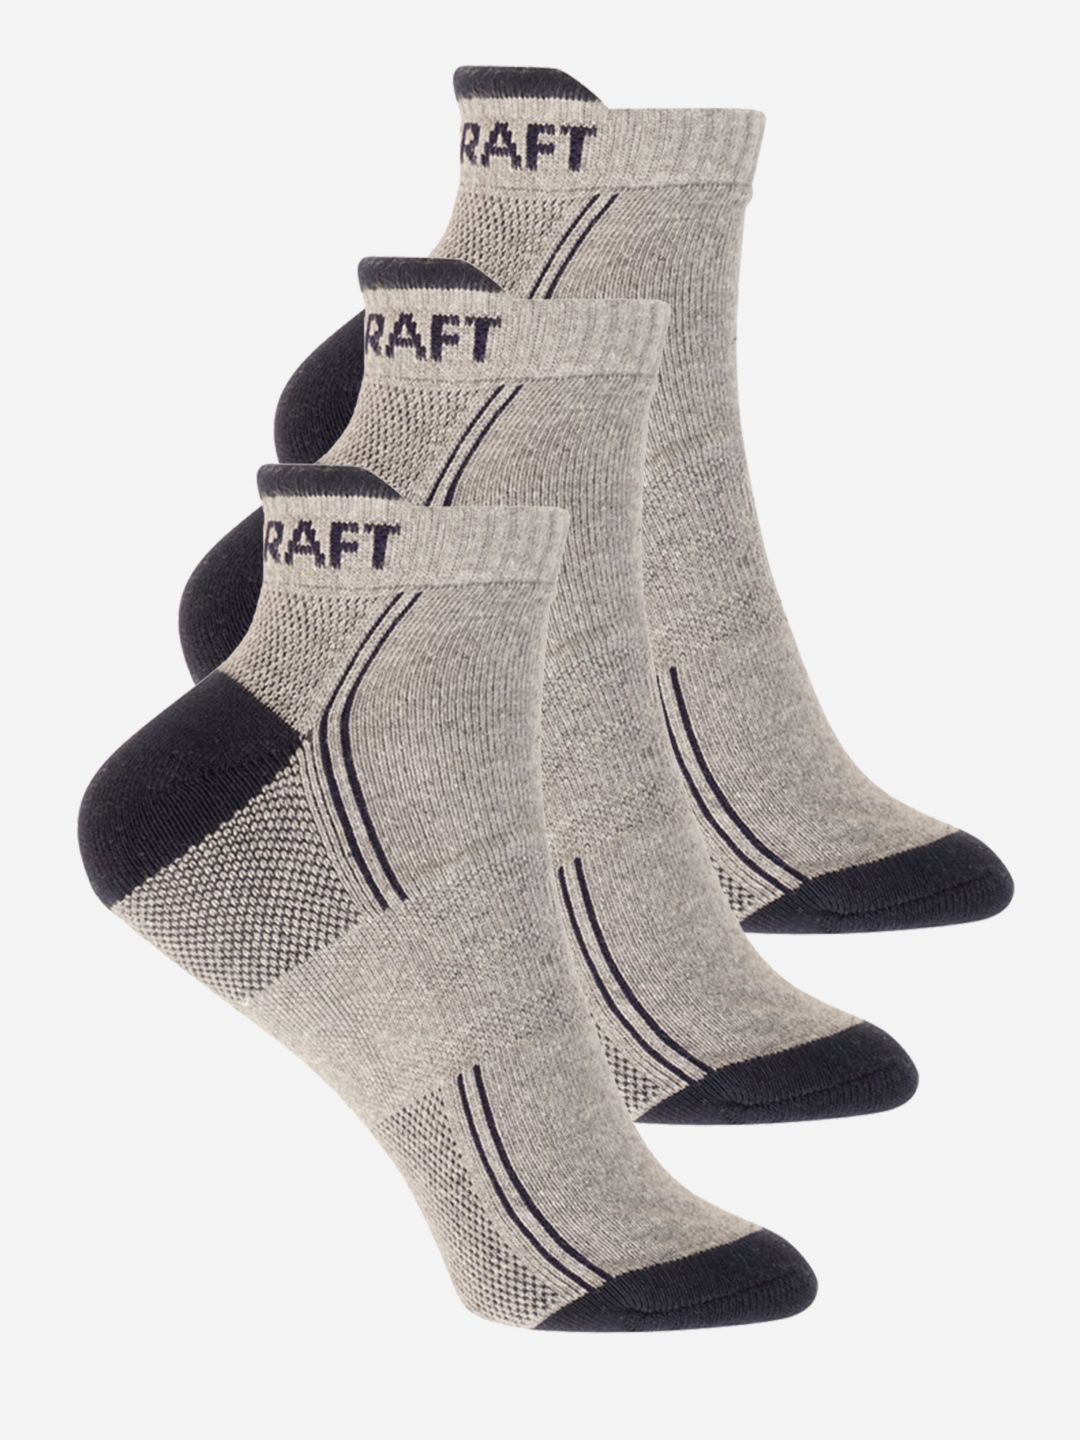 Wildcraft Adults Grey & Navy Blue Pack of 3 Colourblocked Ankle Length Socks Price in India